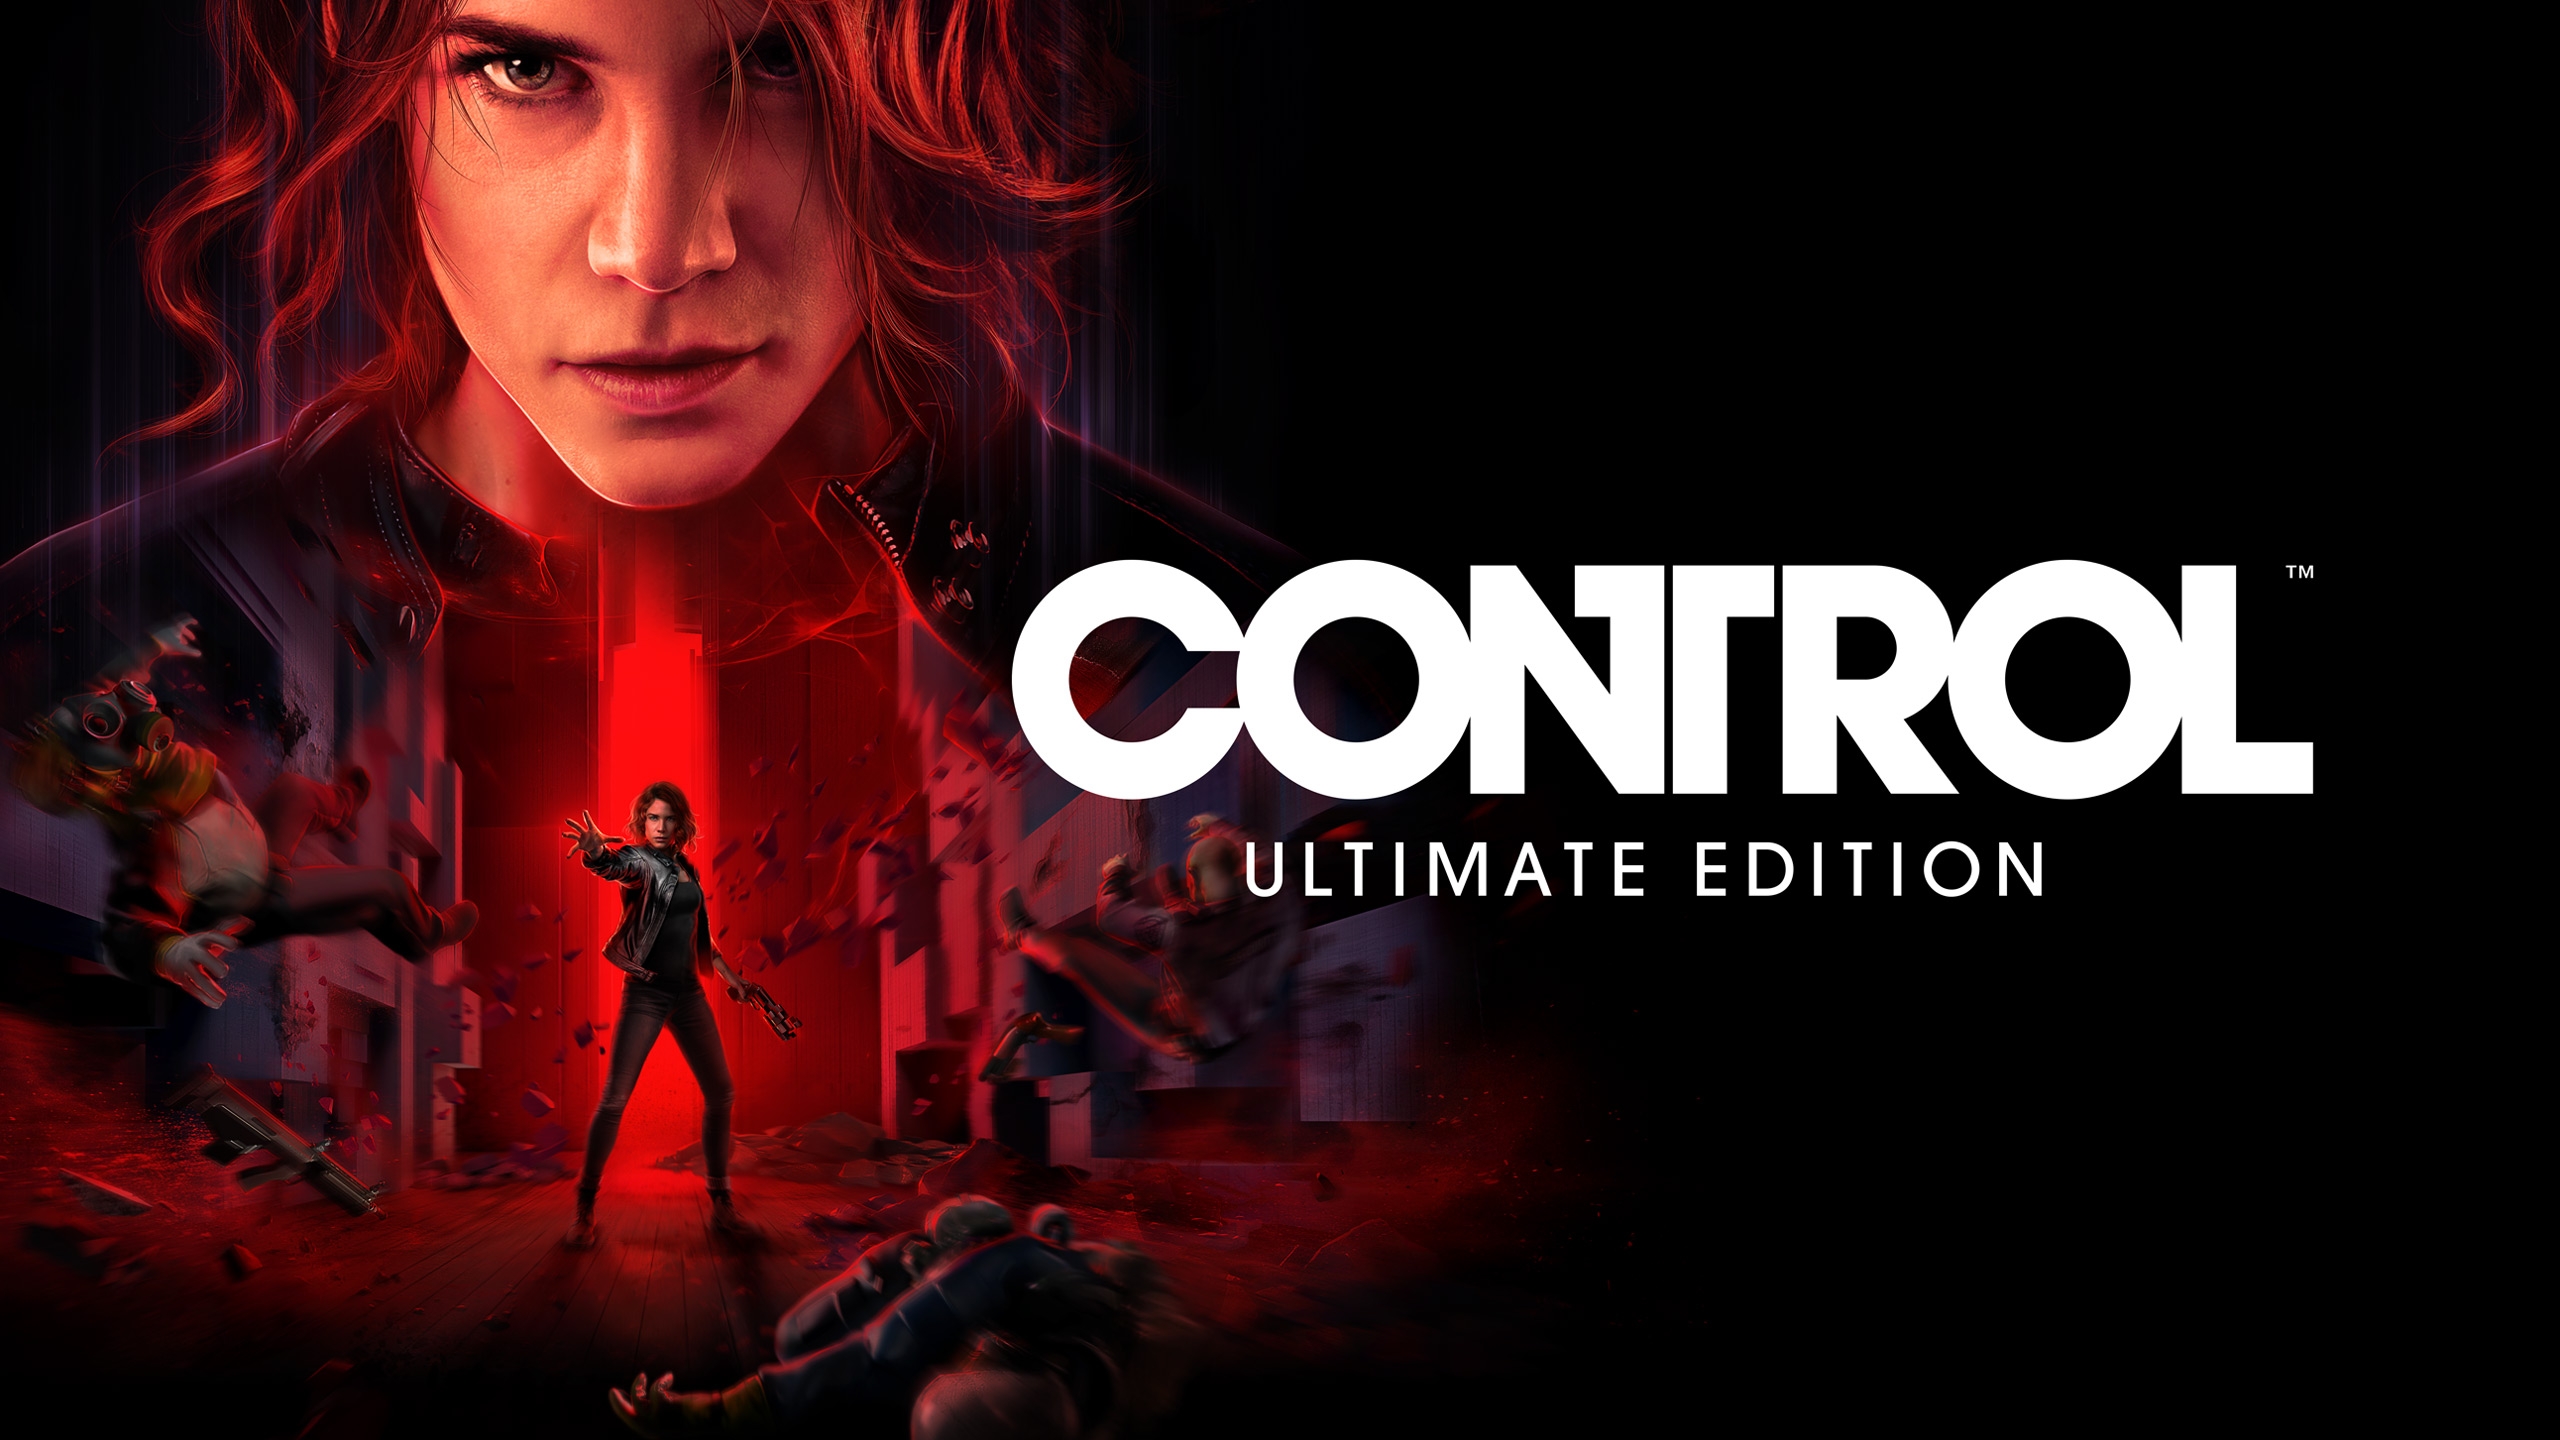 control-ultimate-edition-ultimate-edition-pc-spel-steam-europe-cover.jpg